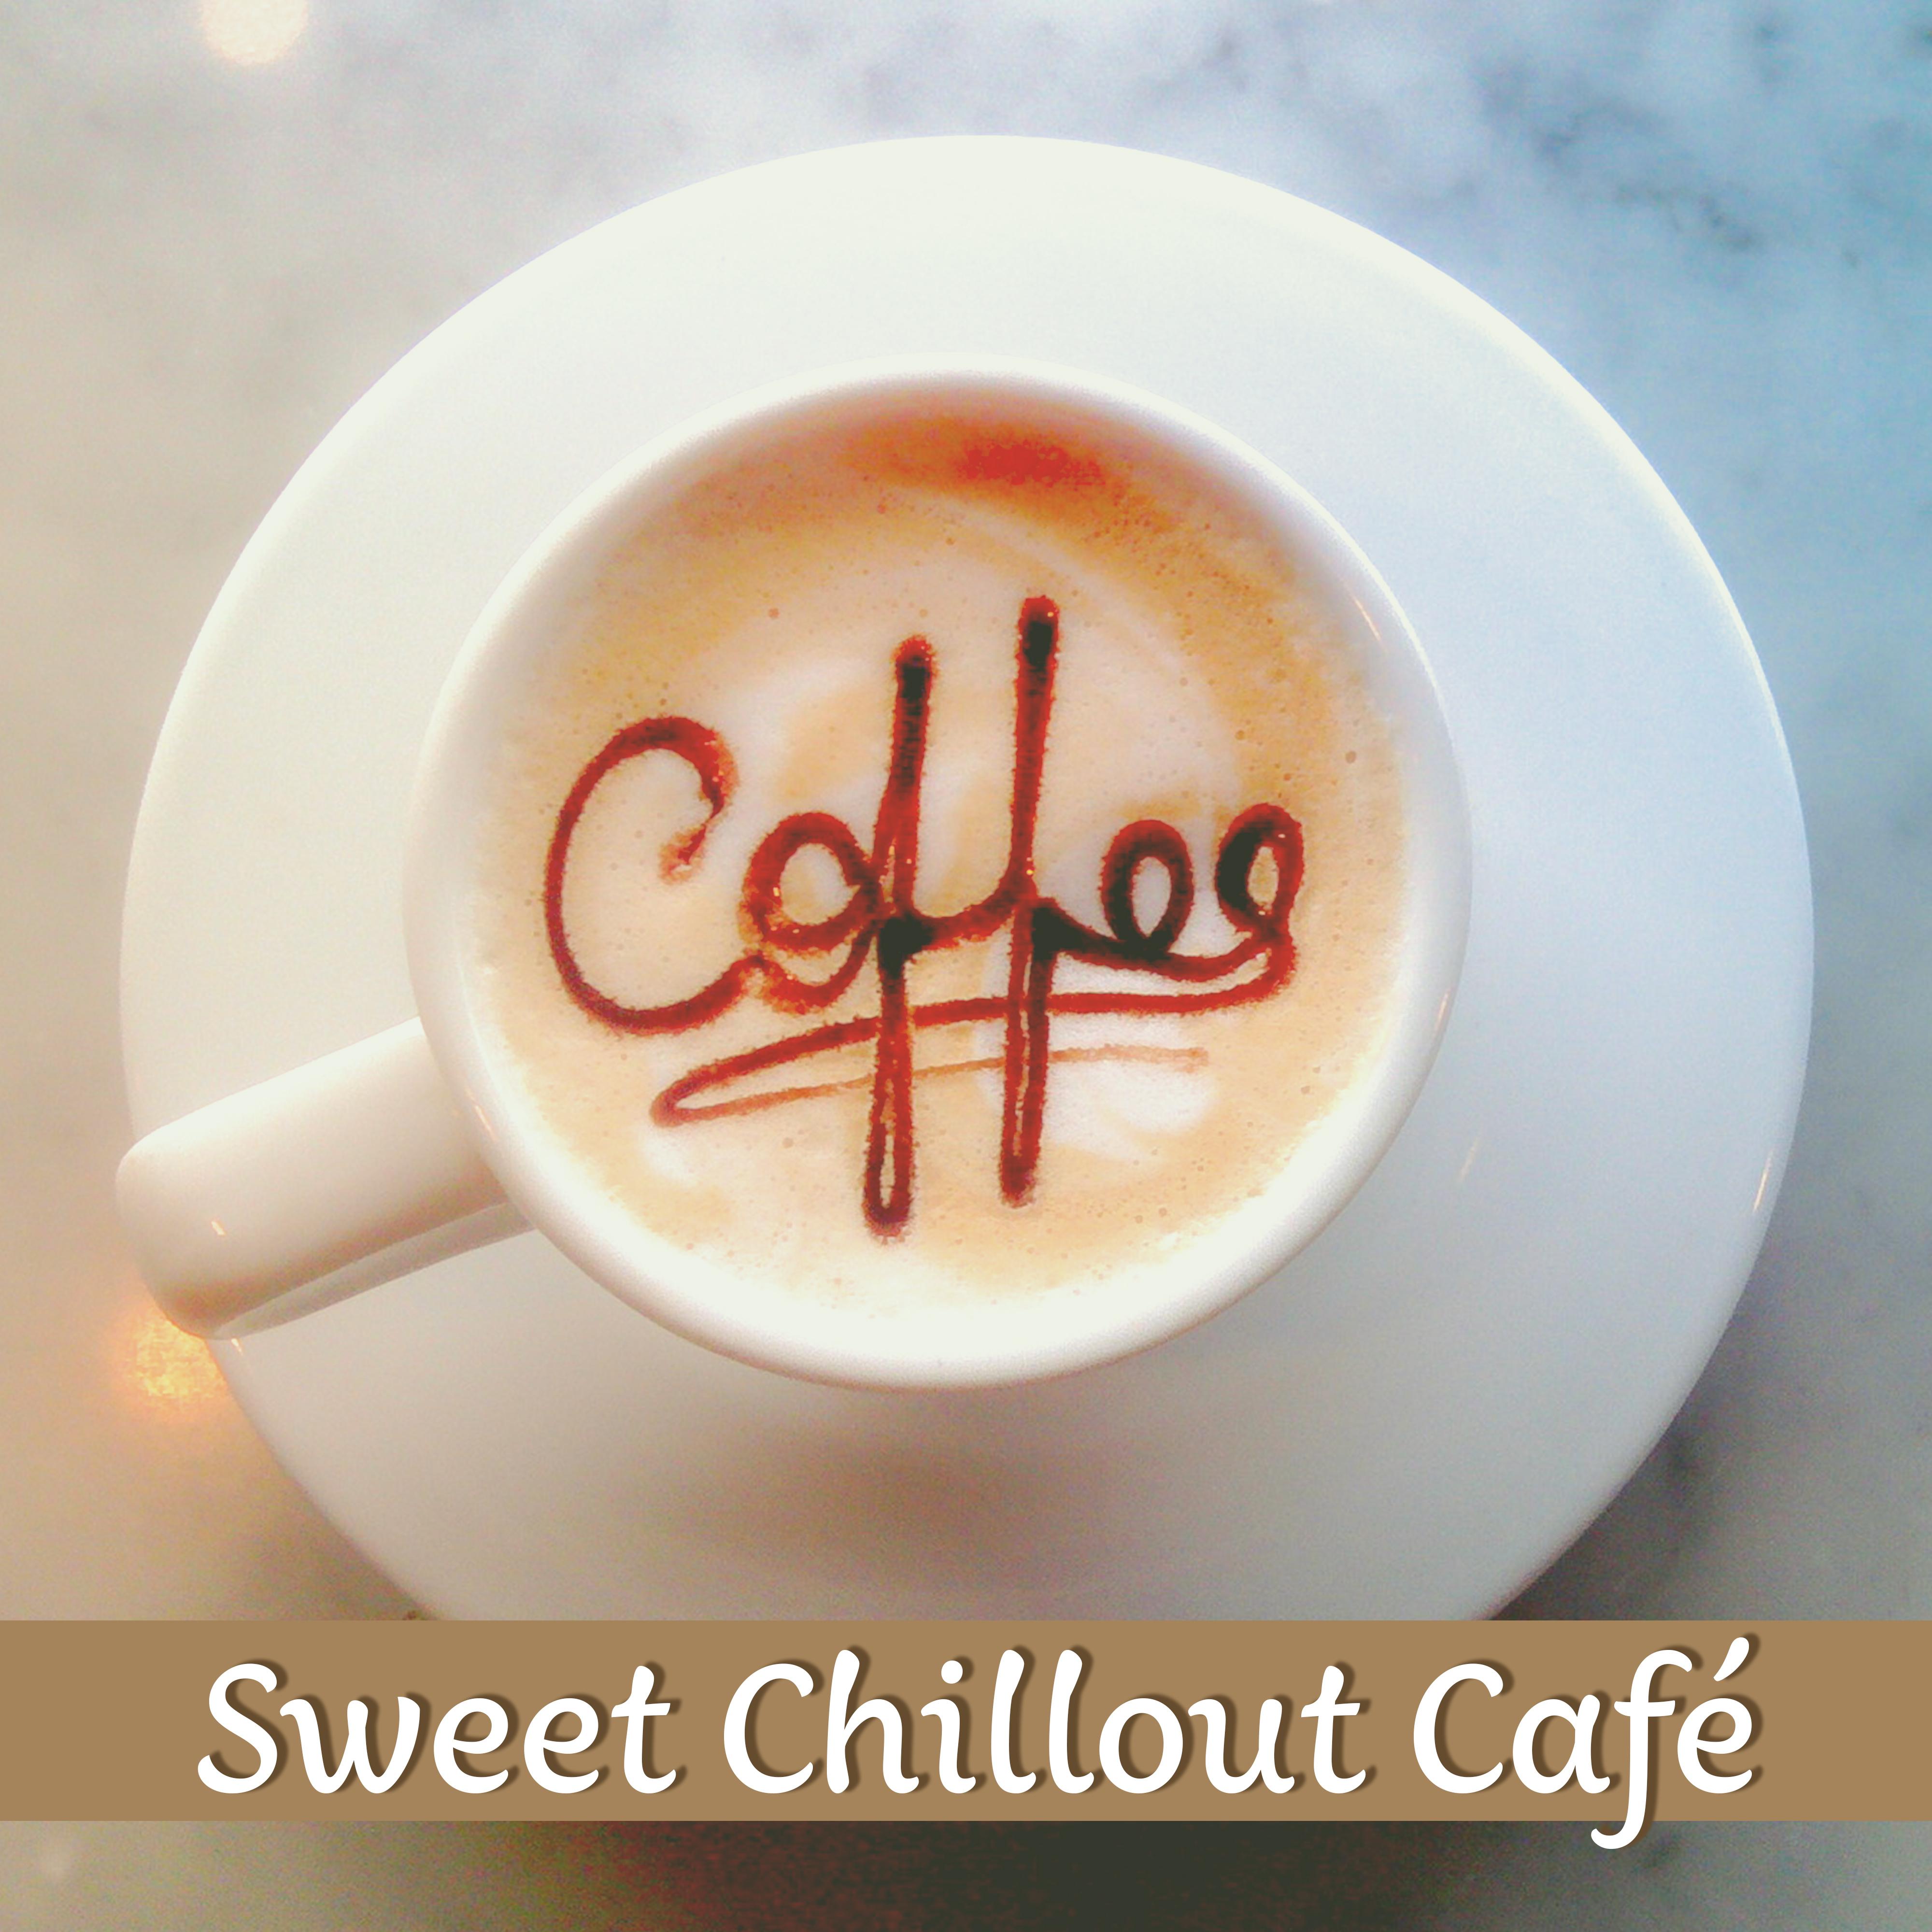 Sweet Chillout Café – Smooth Vibrations, Chill Out Music, Chillout, Just Chill, Music for Café